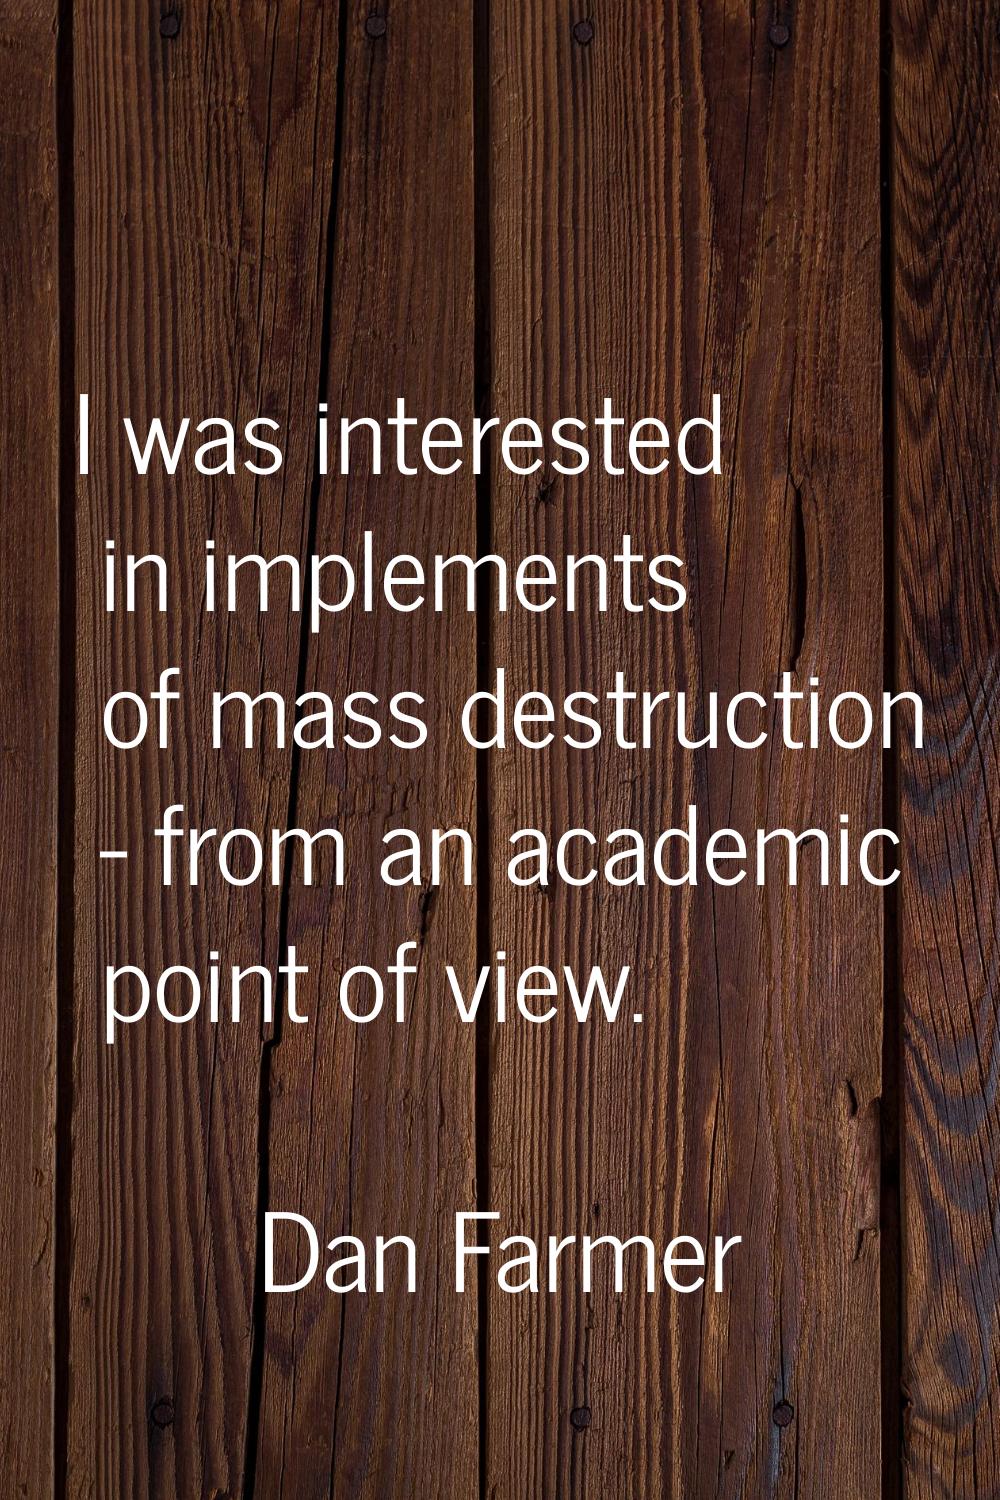 I was interested in implements of mass destruction - from an academic point of view.